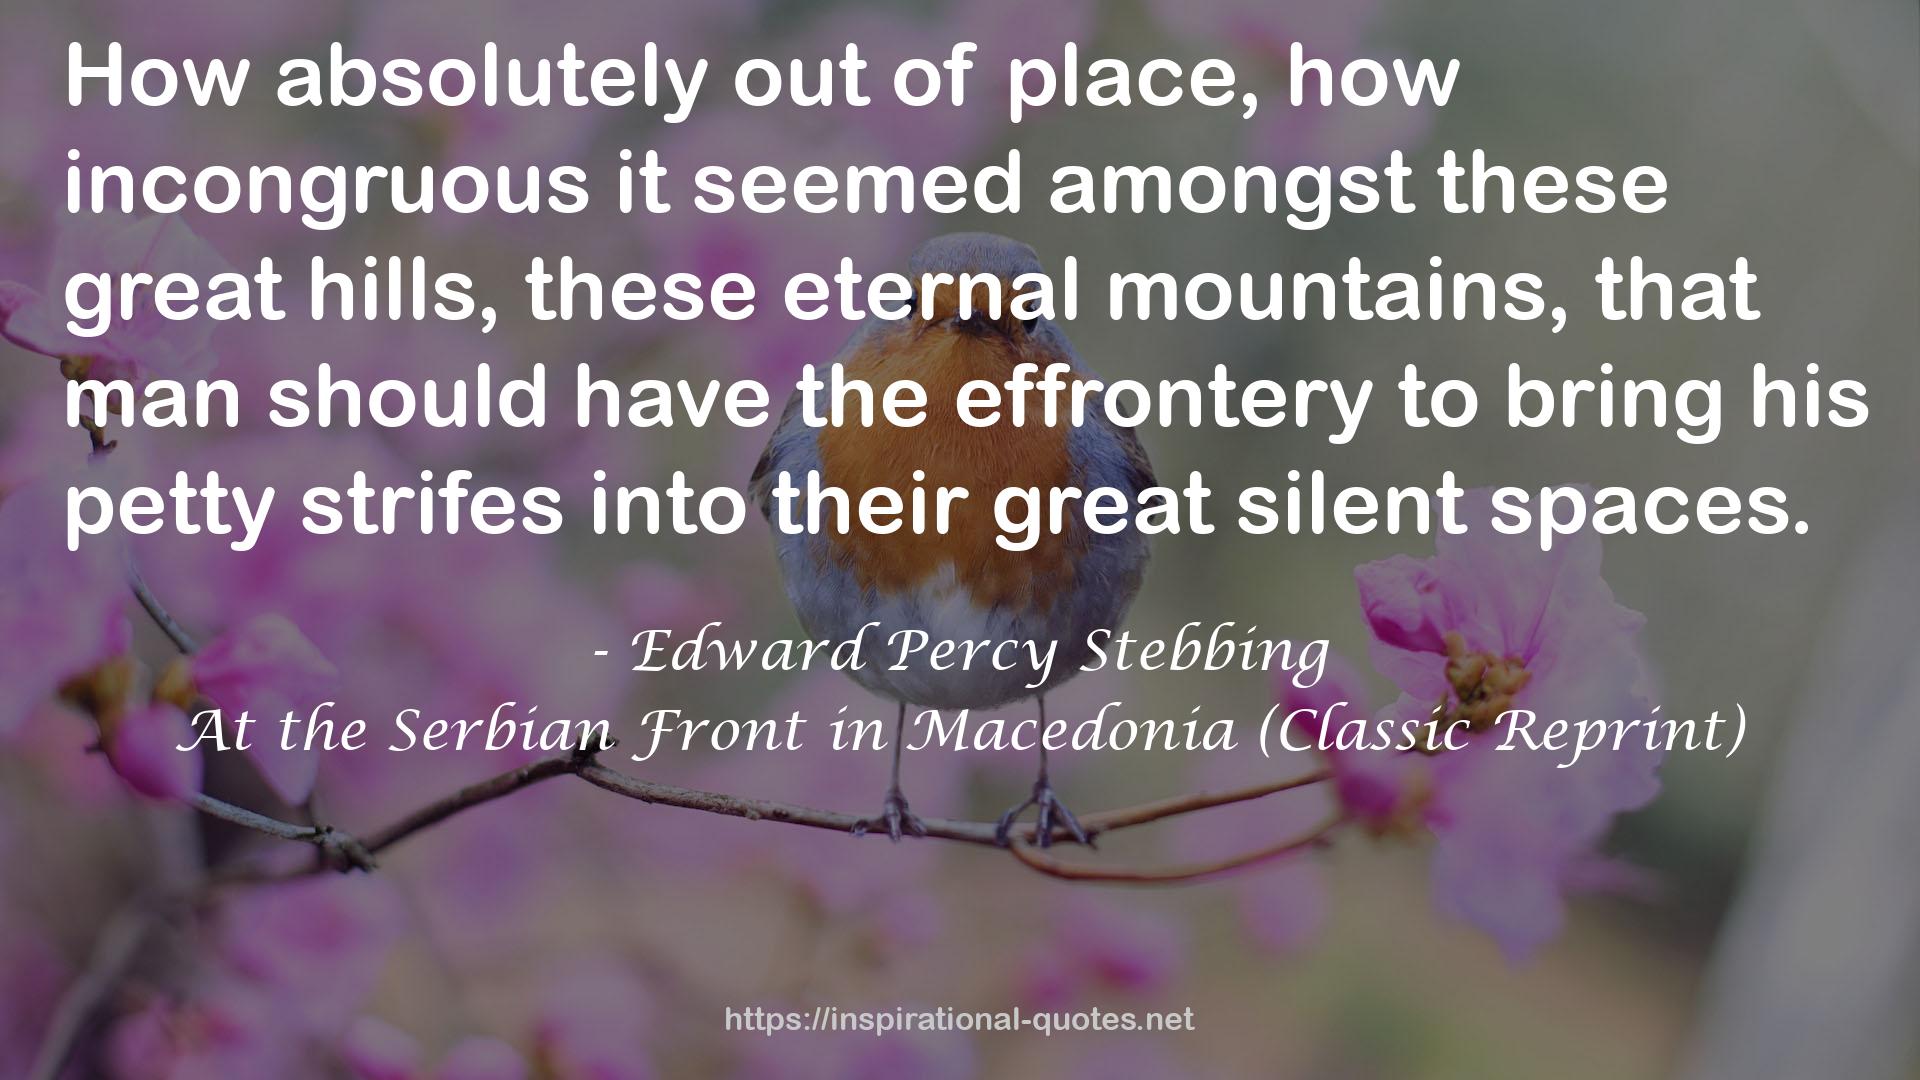 Edward Percy Stebbing QUOTES